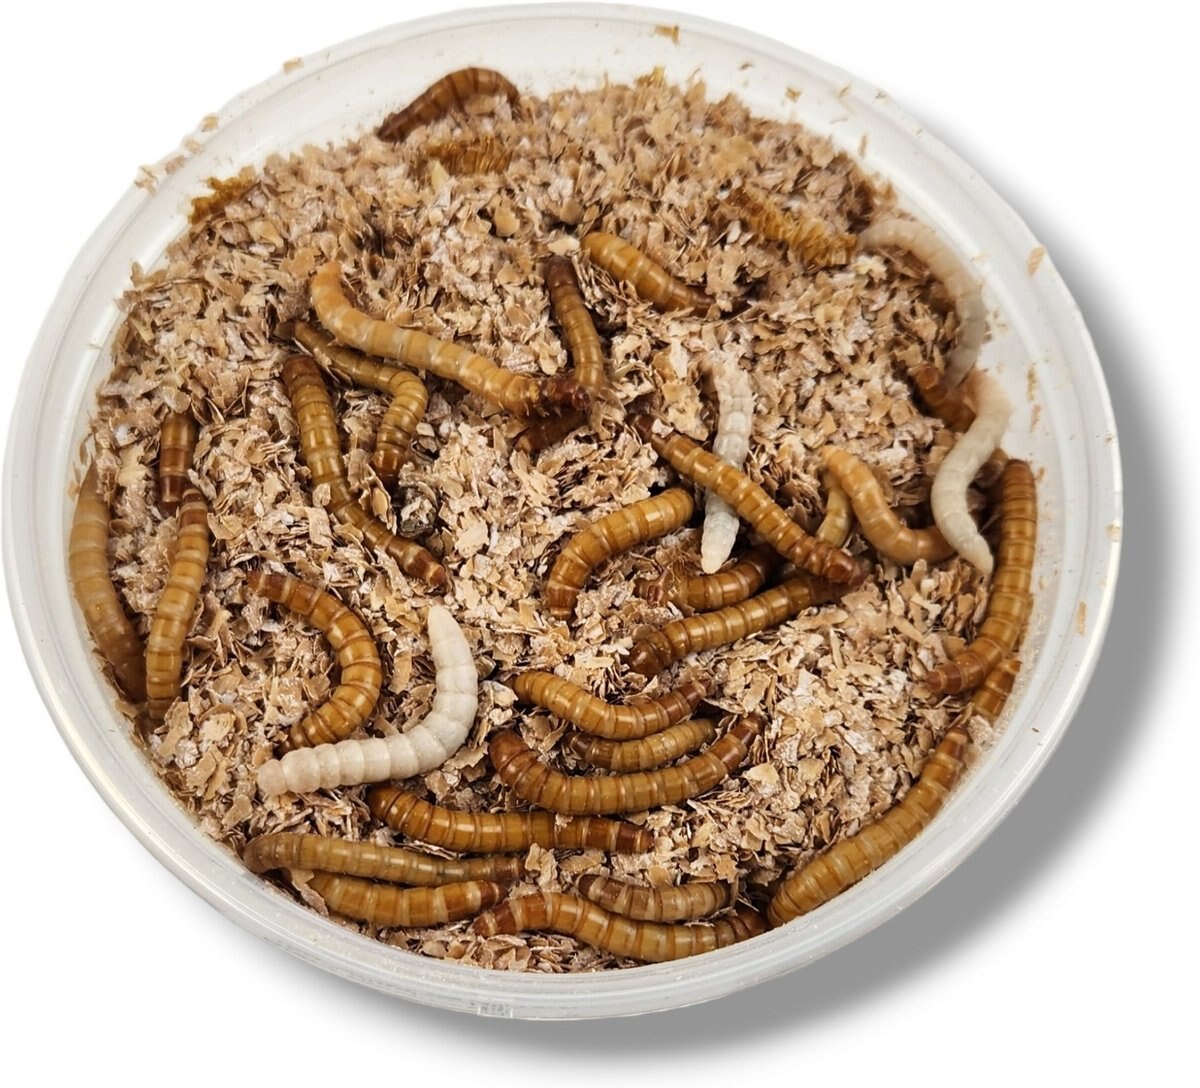 JOSH'S FROGS Giant Mealworms Live Feed Reptile Food, 50 count